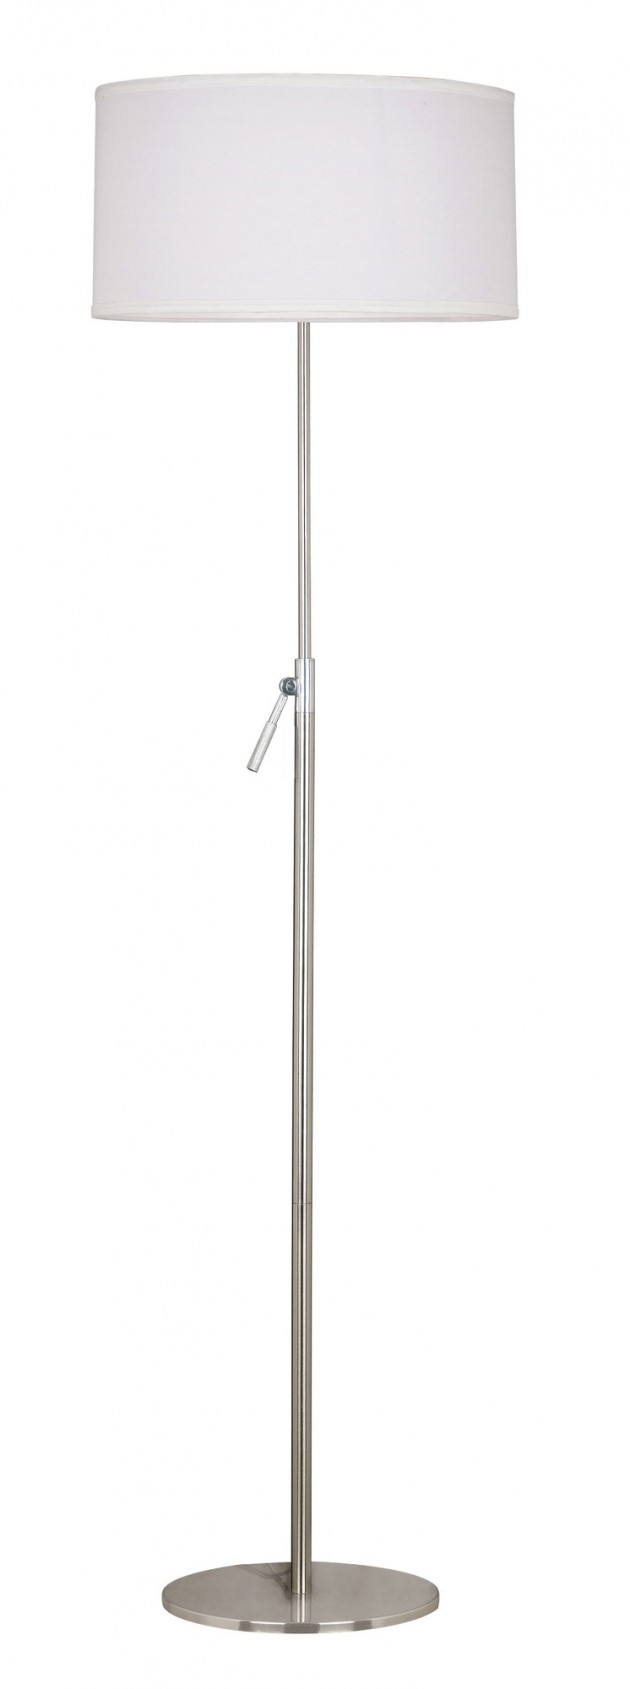 A Collection of Floor Lamps for an Elegant Look (5)